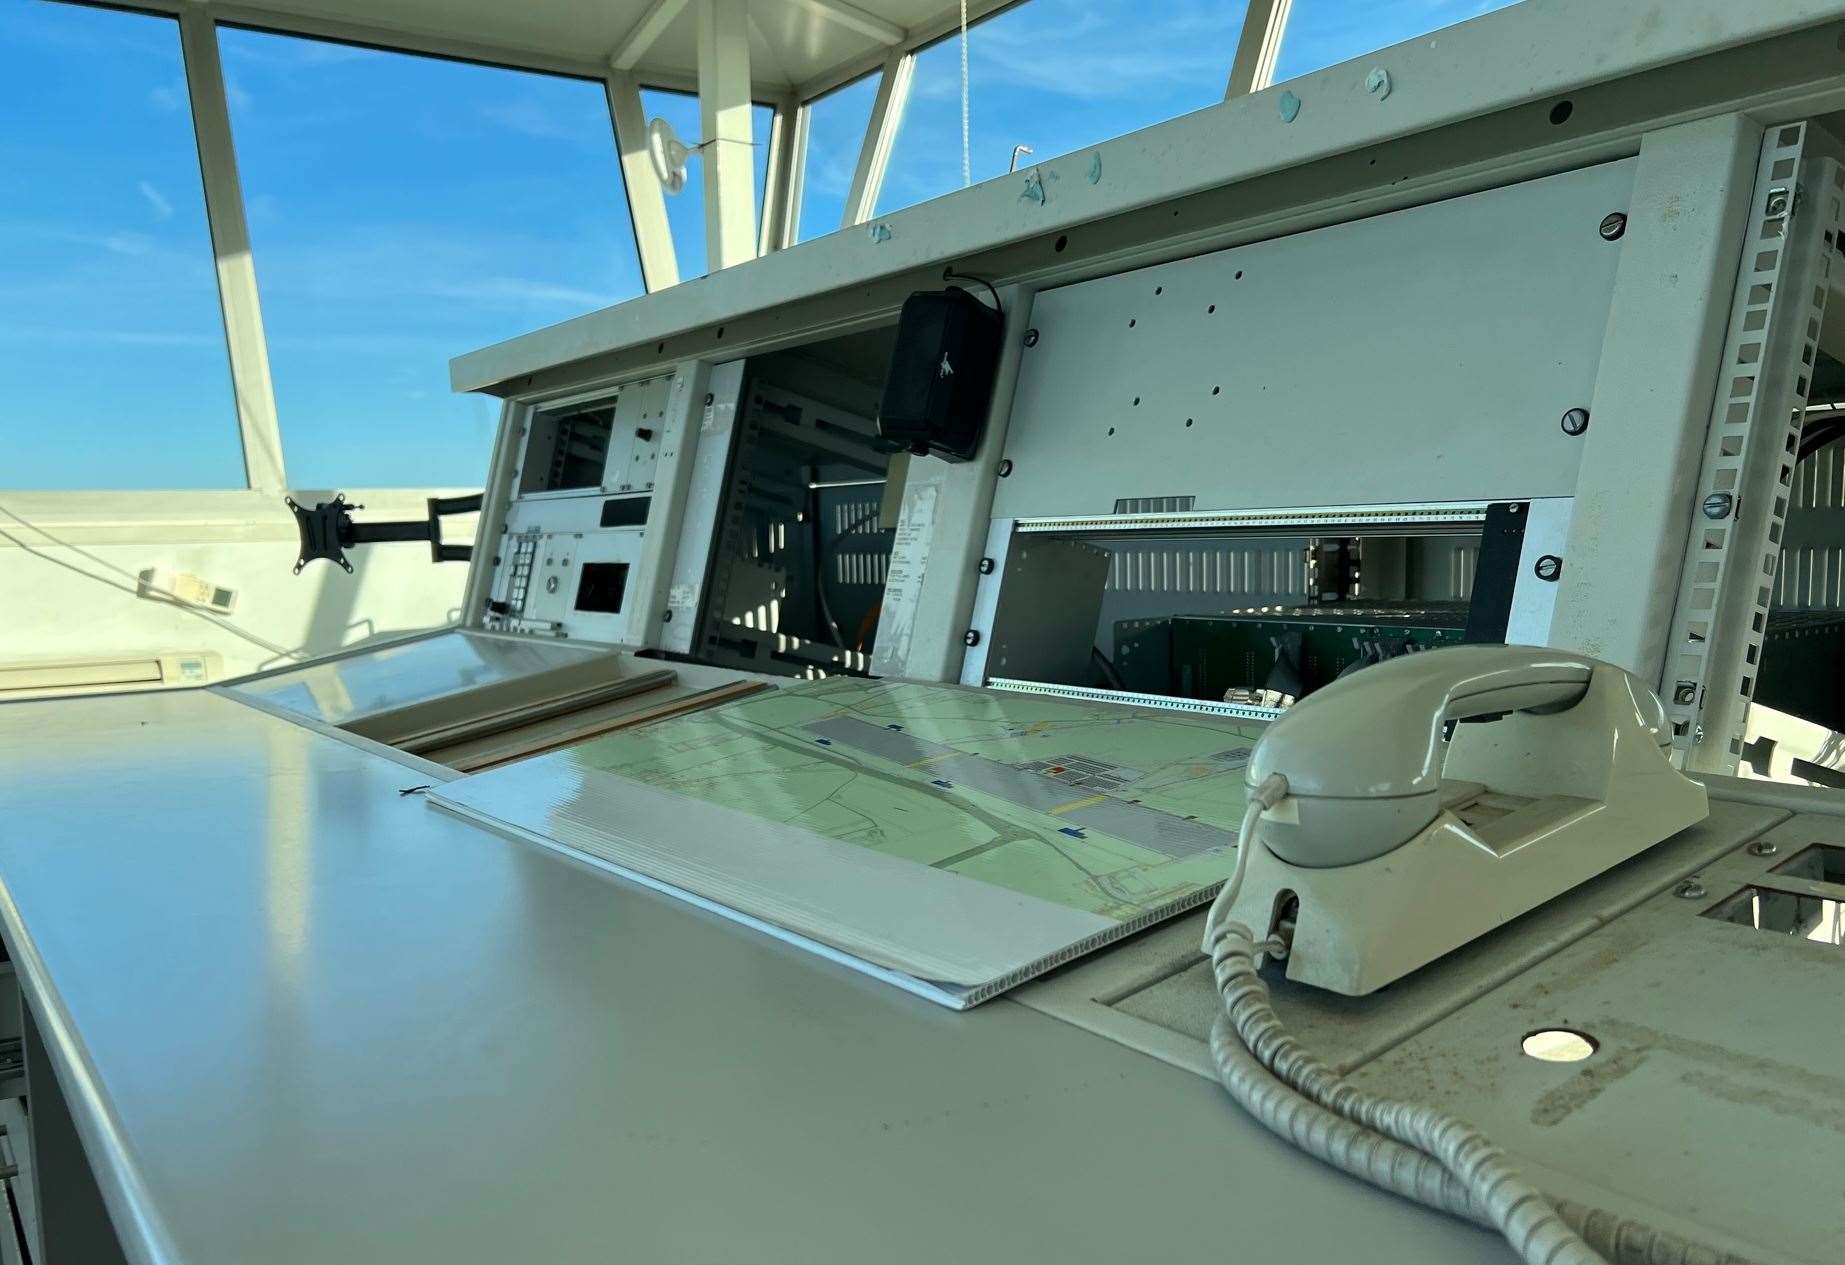 The main desks in the control tower - anything of value has long since been sold